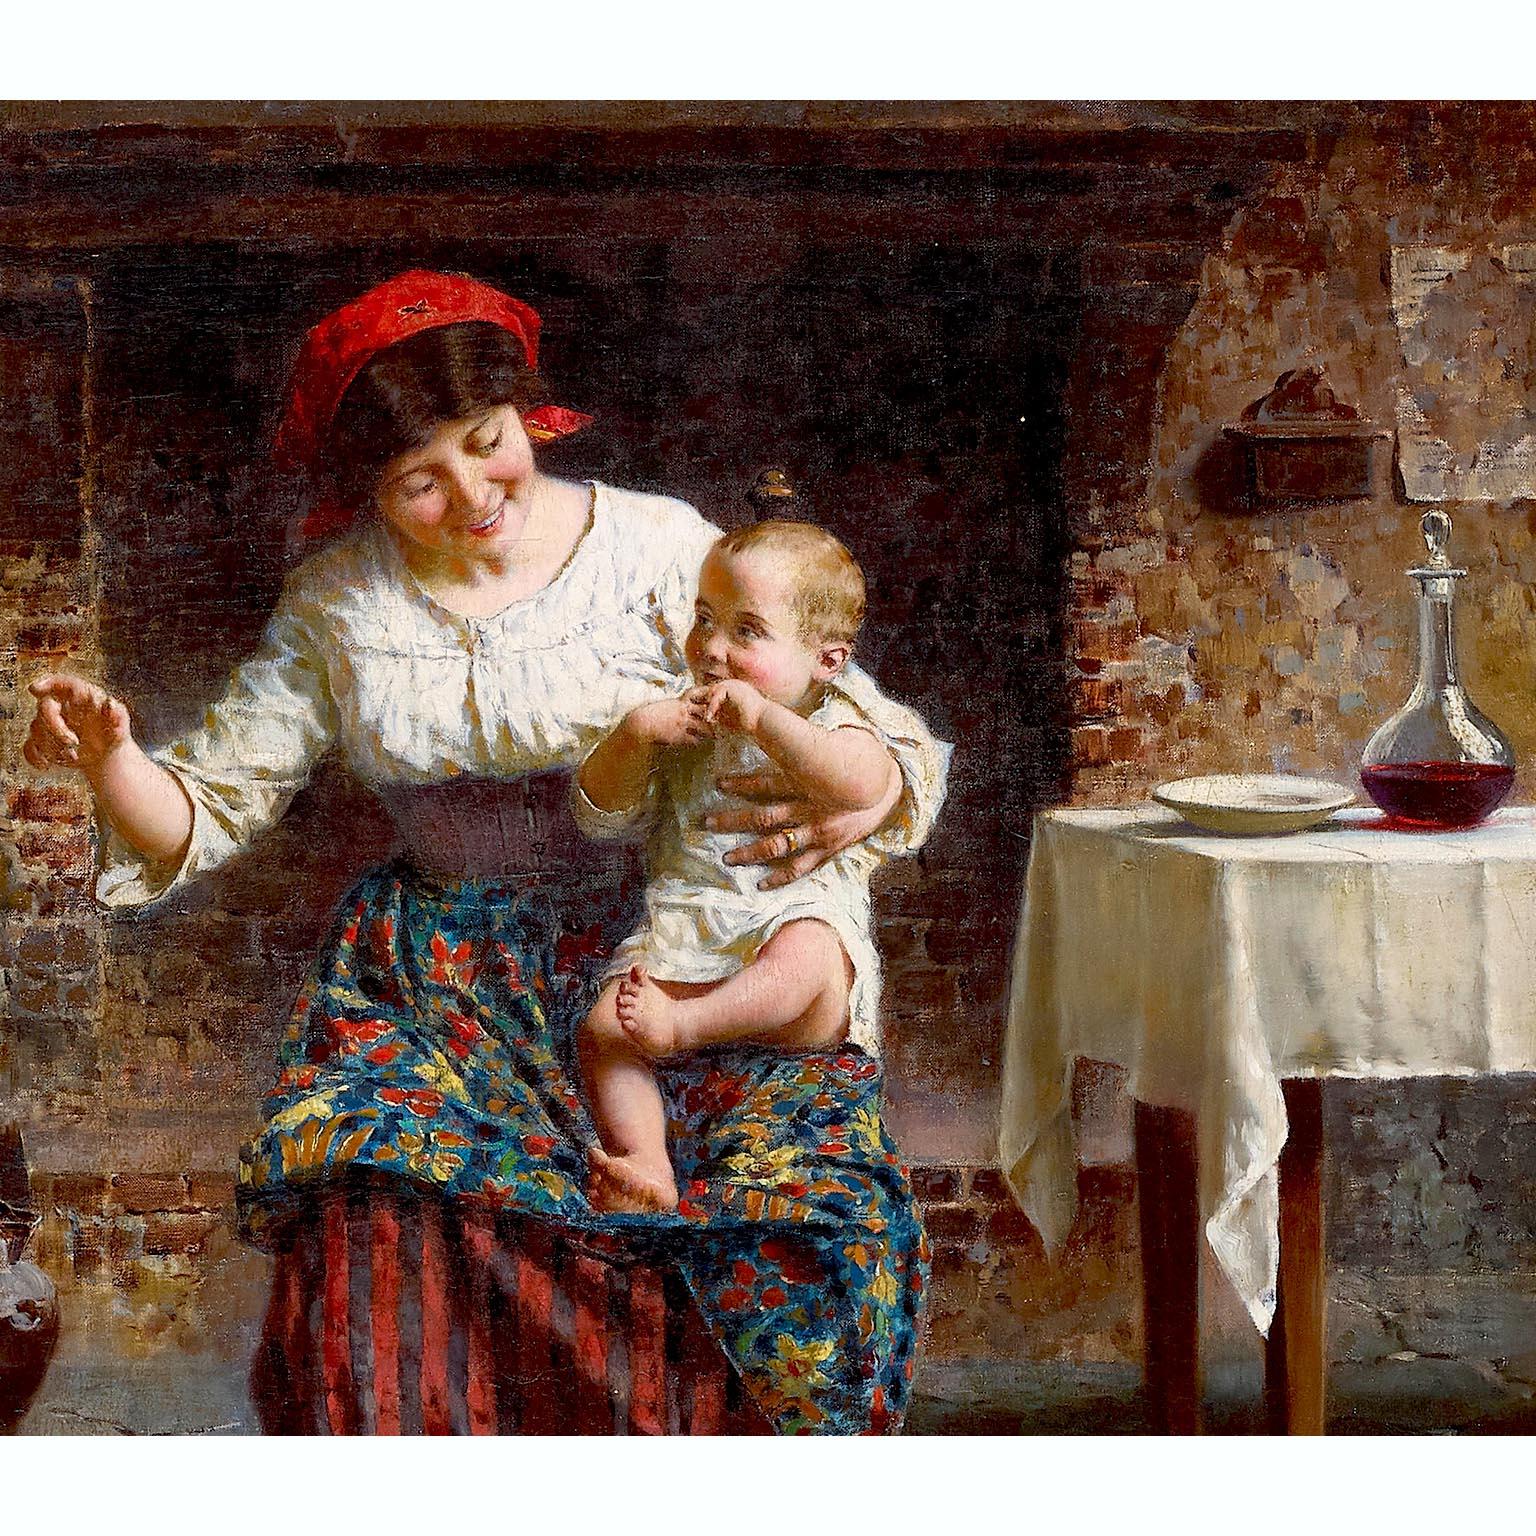 Hand-Carved Eugenio Zampighi 'Italian, 1859-1944' 19th/20th C. Oil on Canvas 